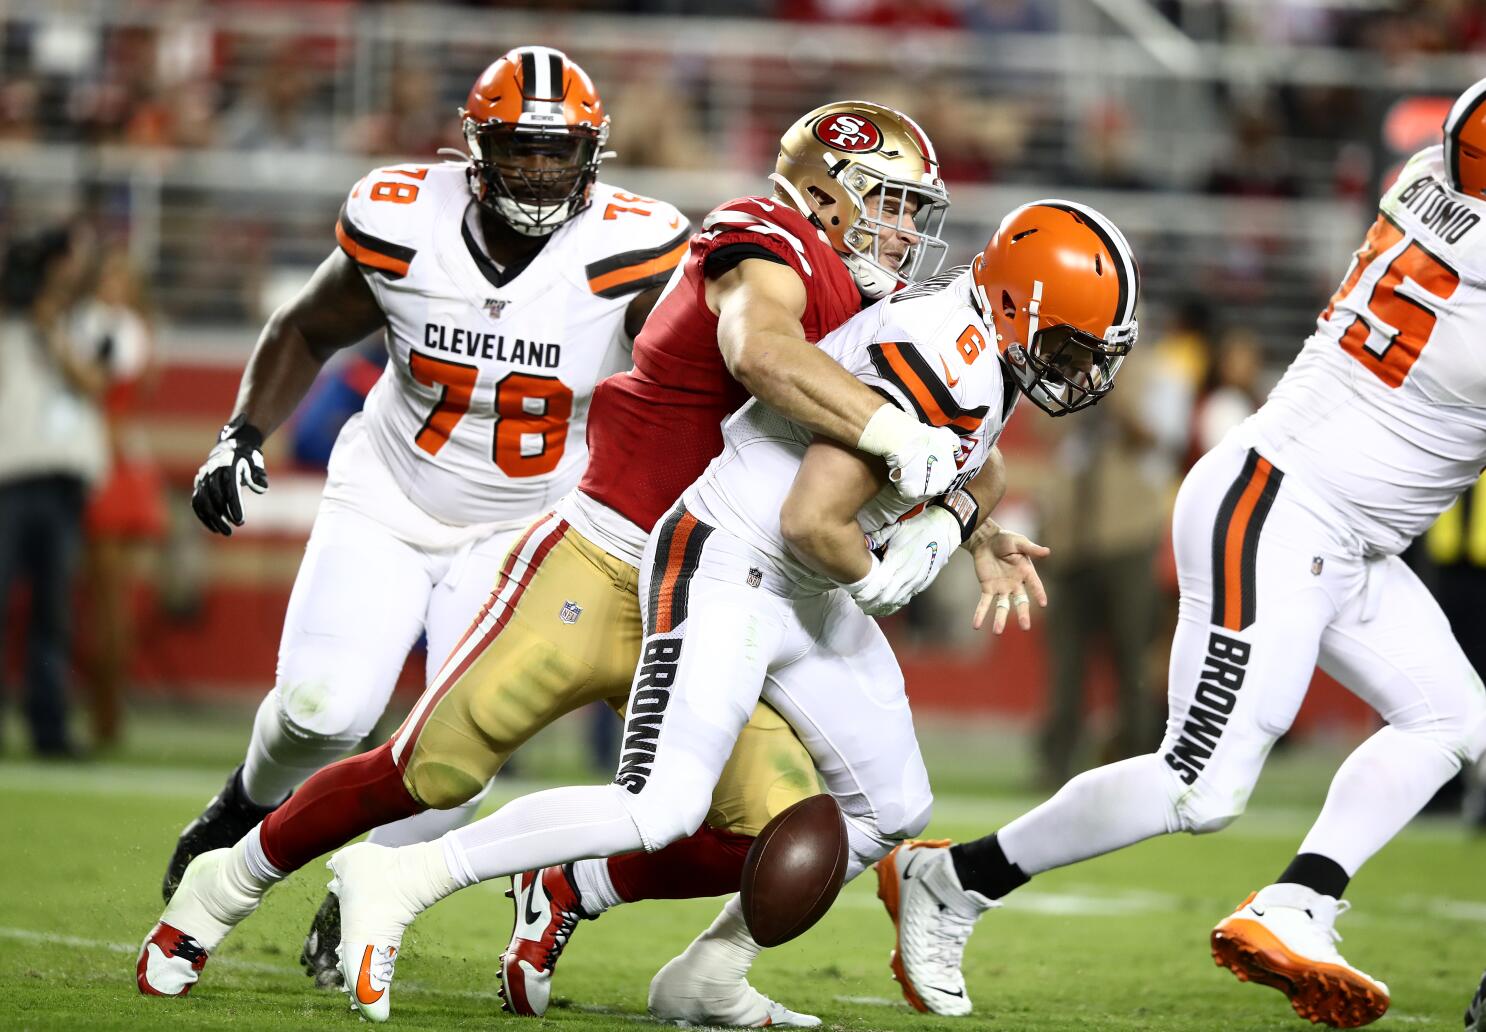 QB Mayfield has another revenge game, this time vs. Browns